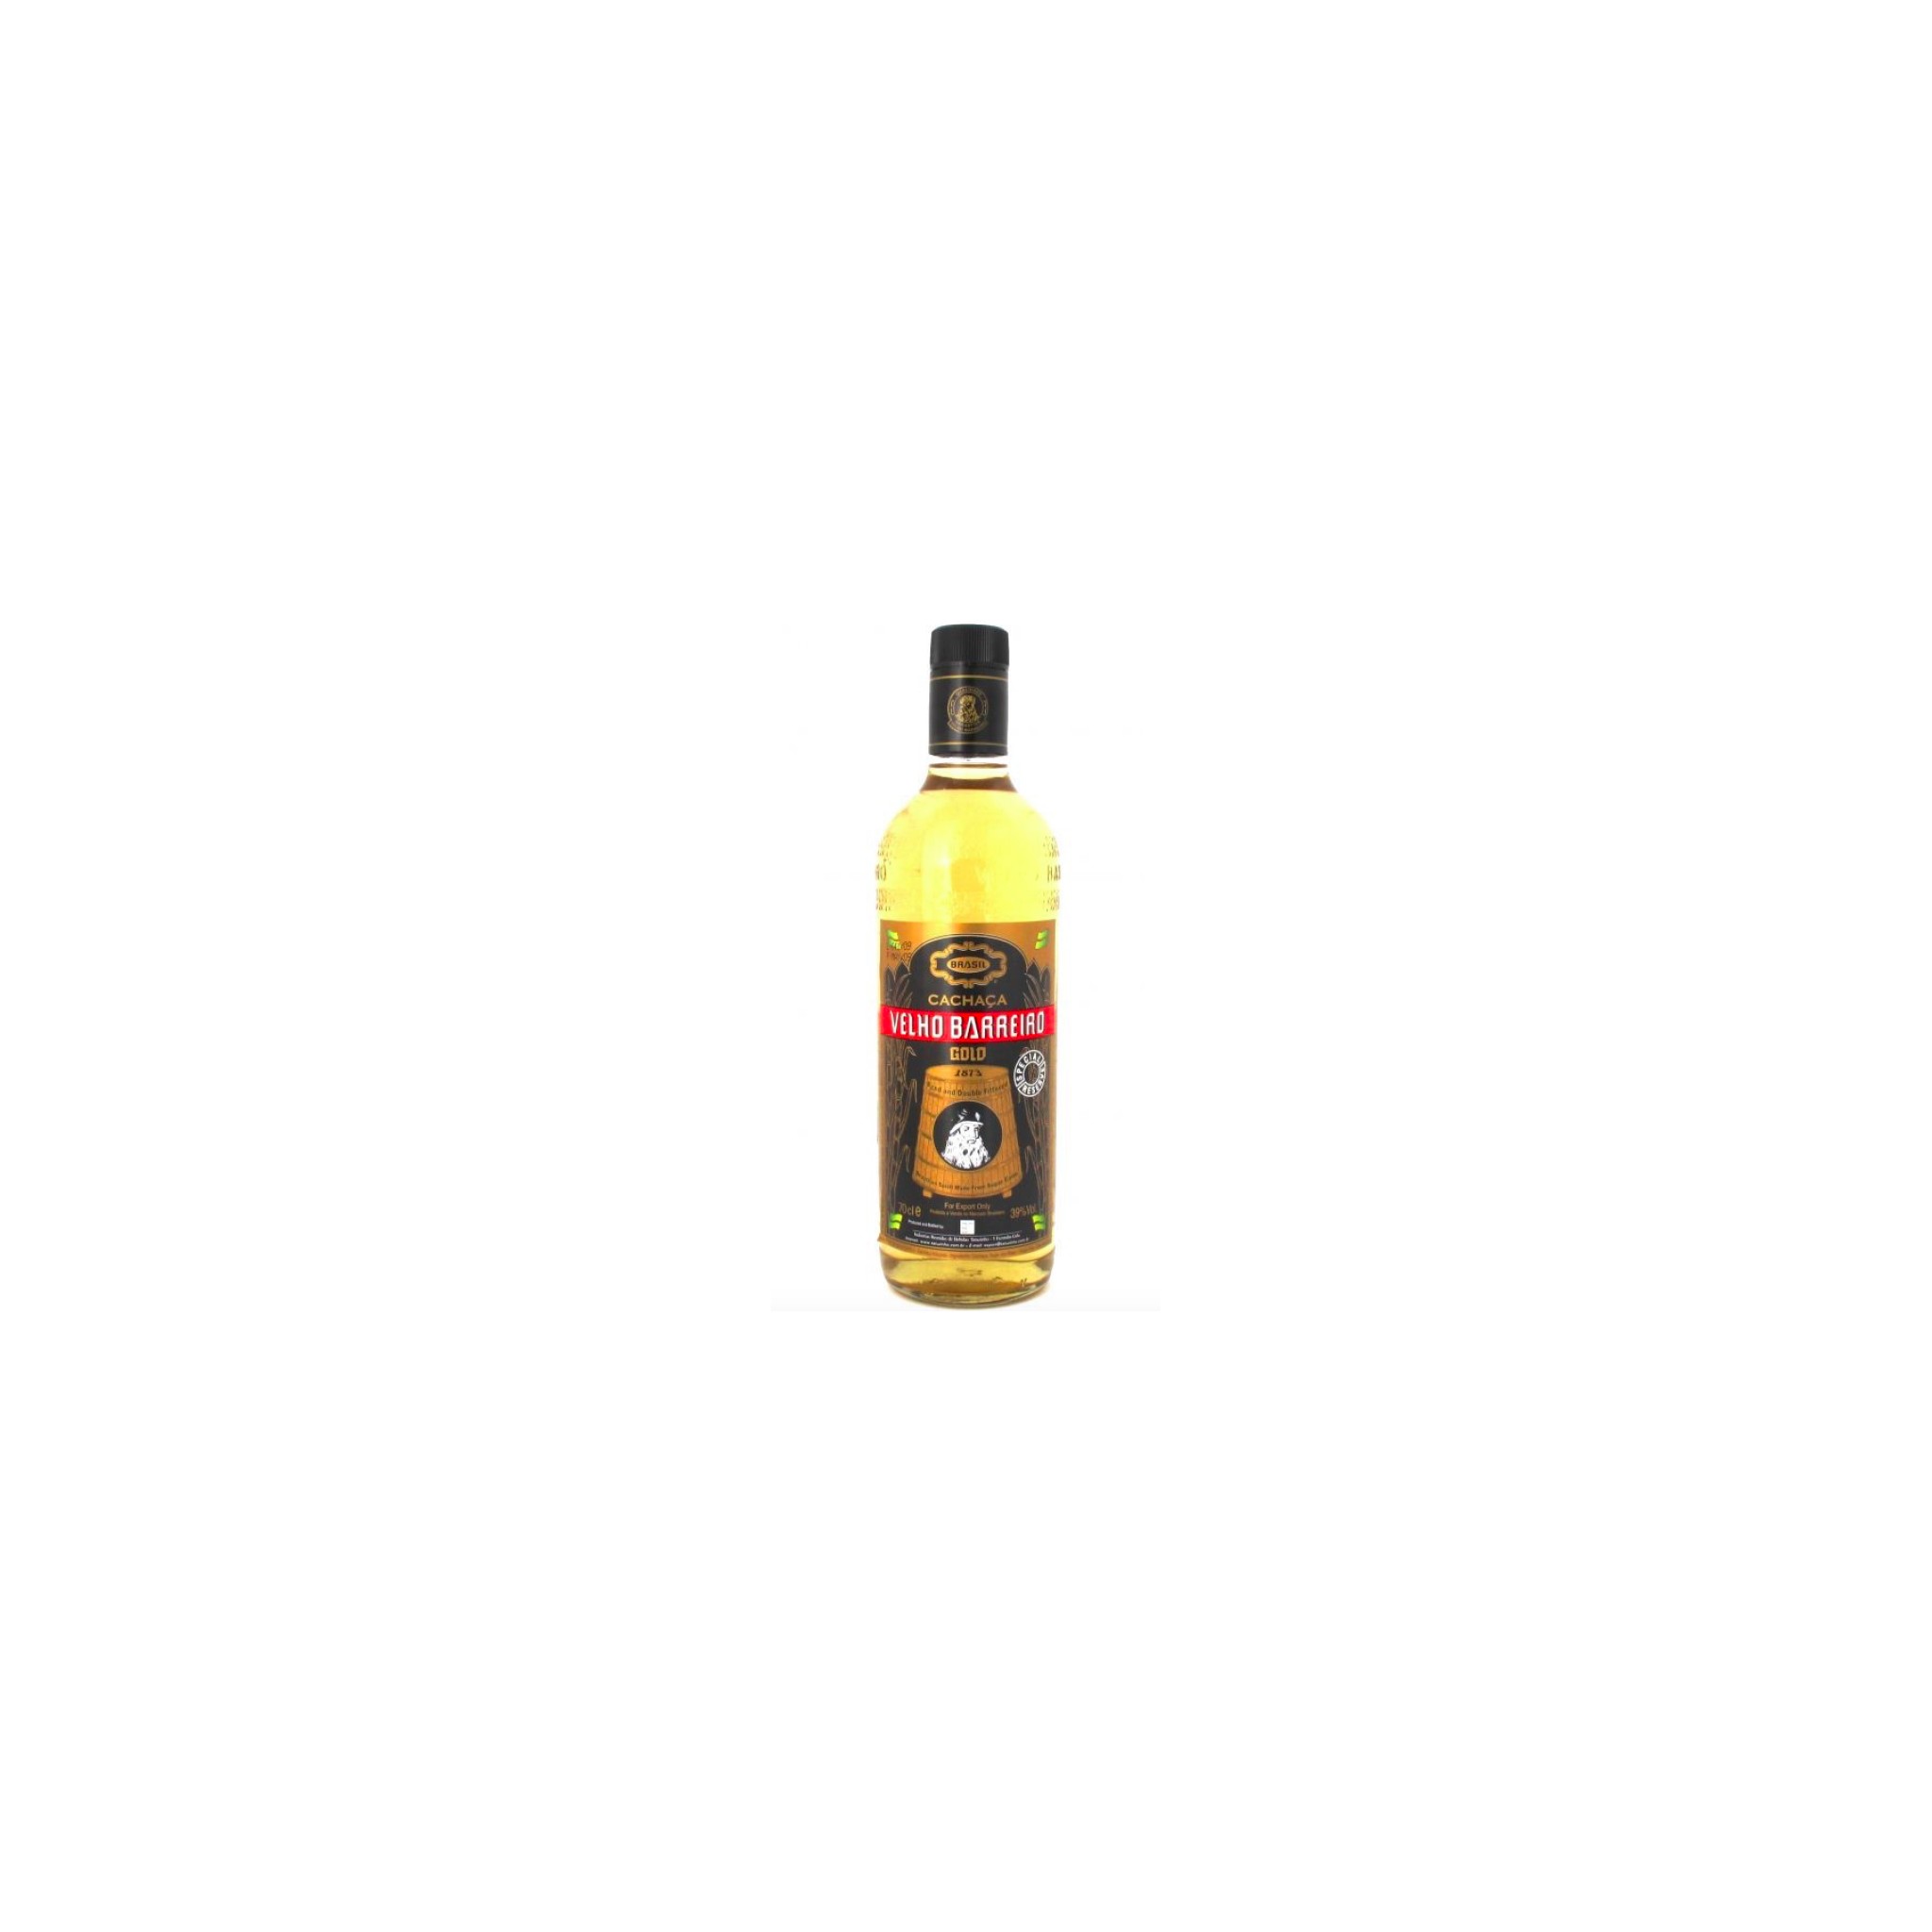 OF Vulpitta Sale OUR COGNAC 101 Corso SELECTION BRANDY, Online FRENCH SPANISH SPIRITS,